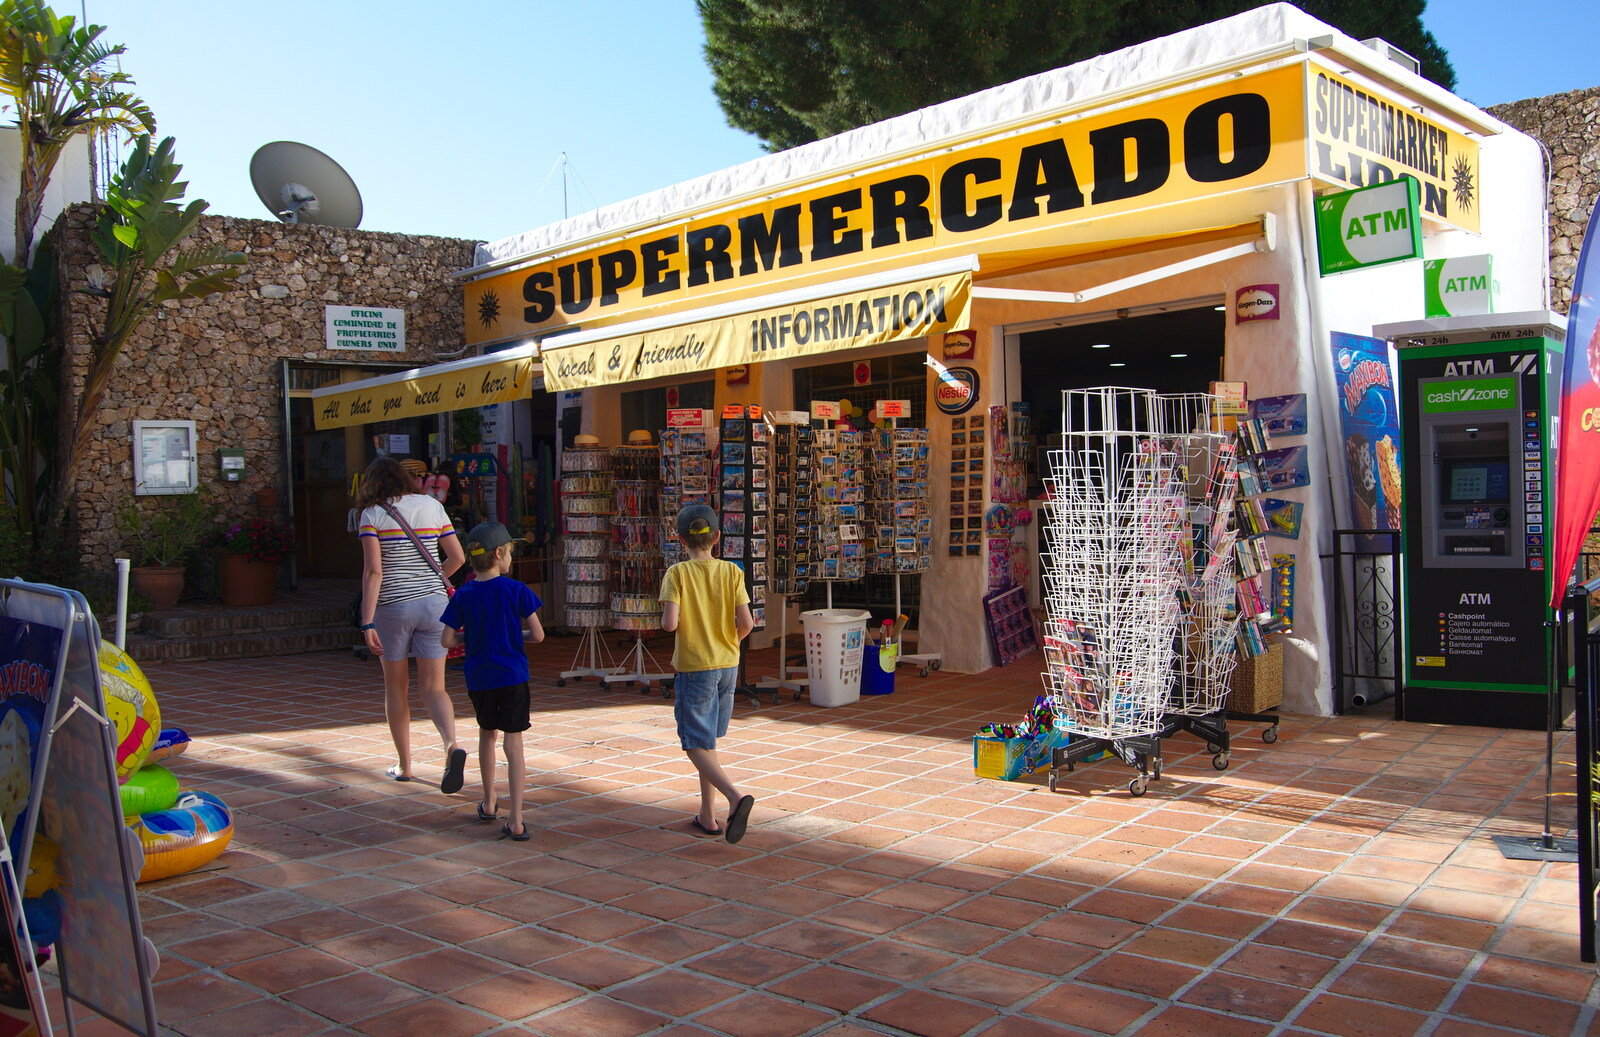 We visit the local Supermercado from A Holiday in Nerja, Andalusia, Spain - 15th April 2019